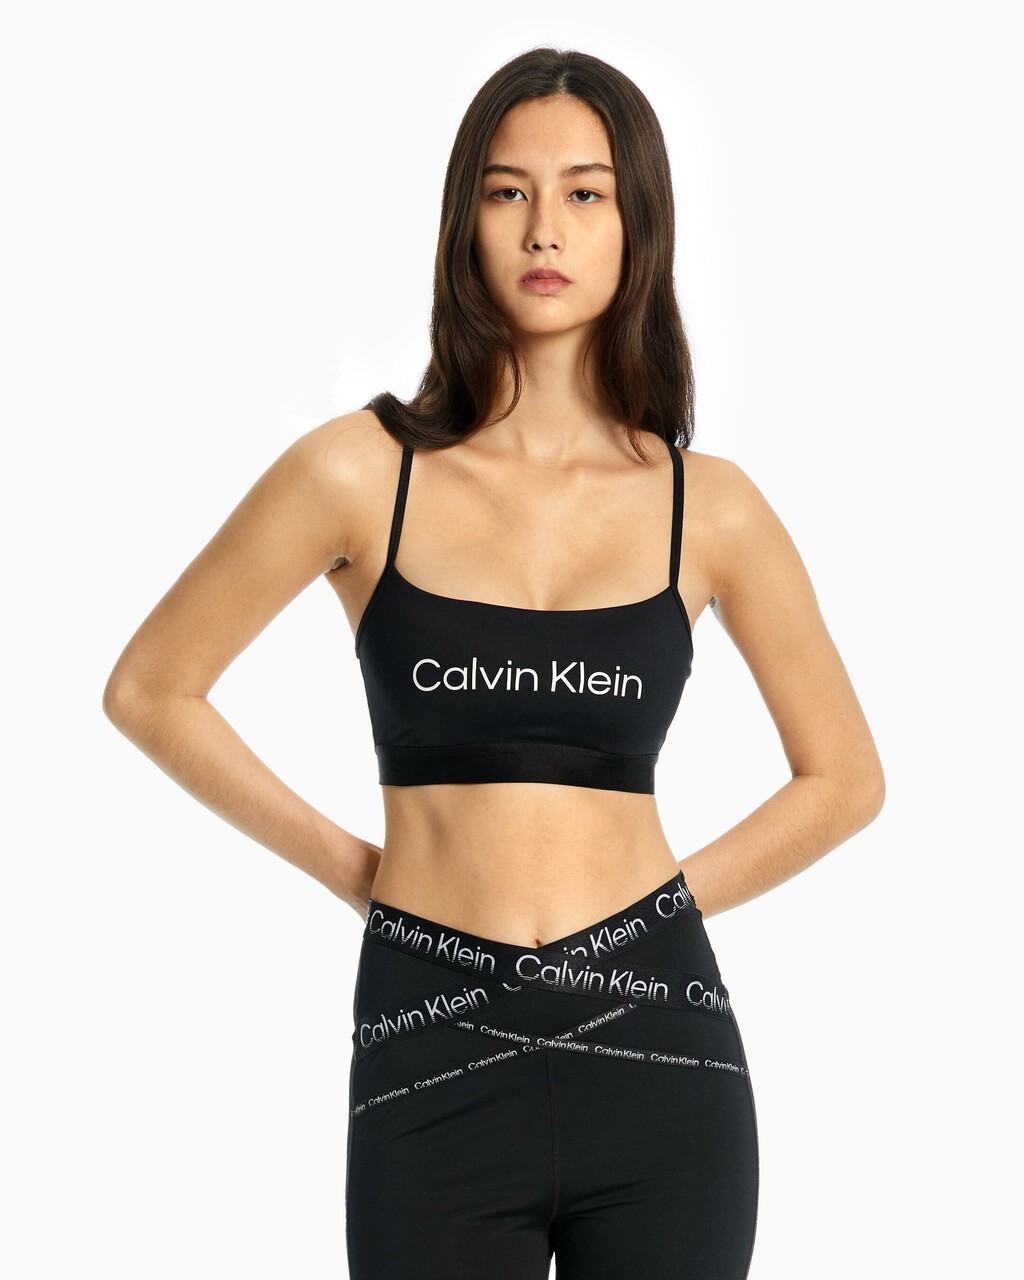 CORE WORKOUT LOW SUPPORT SPORTS BRA, CK BLACK, hi-res